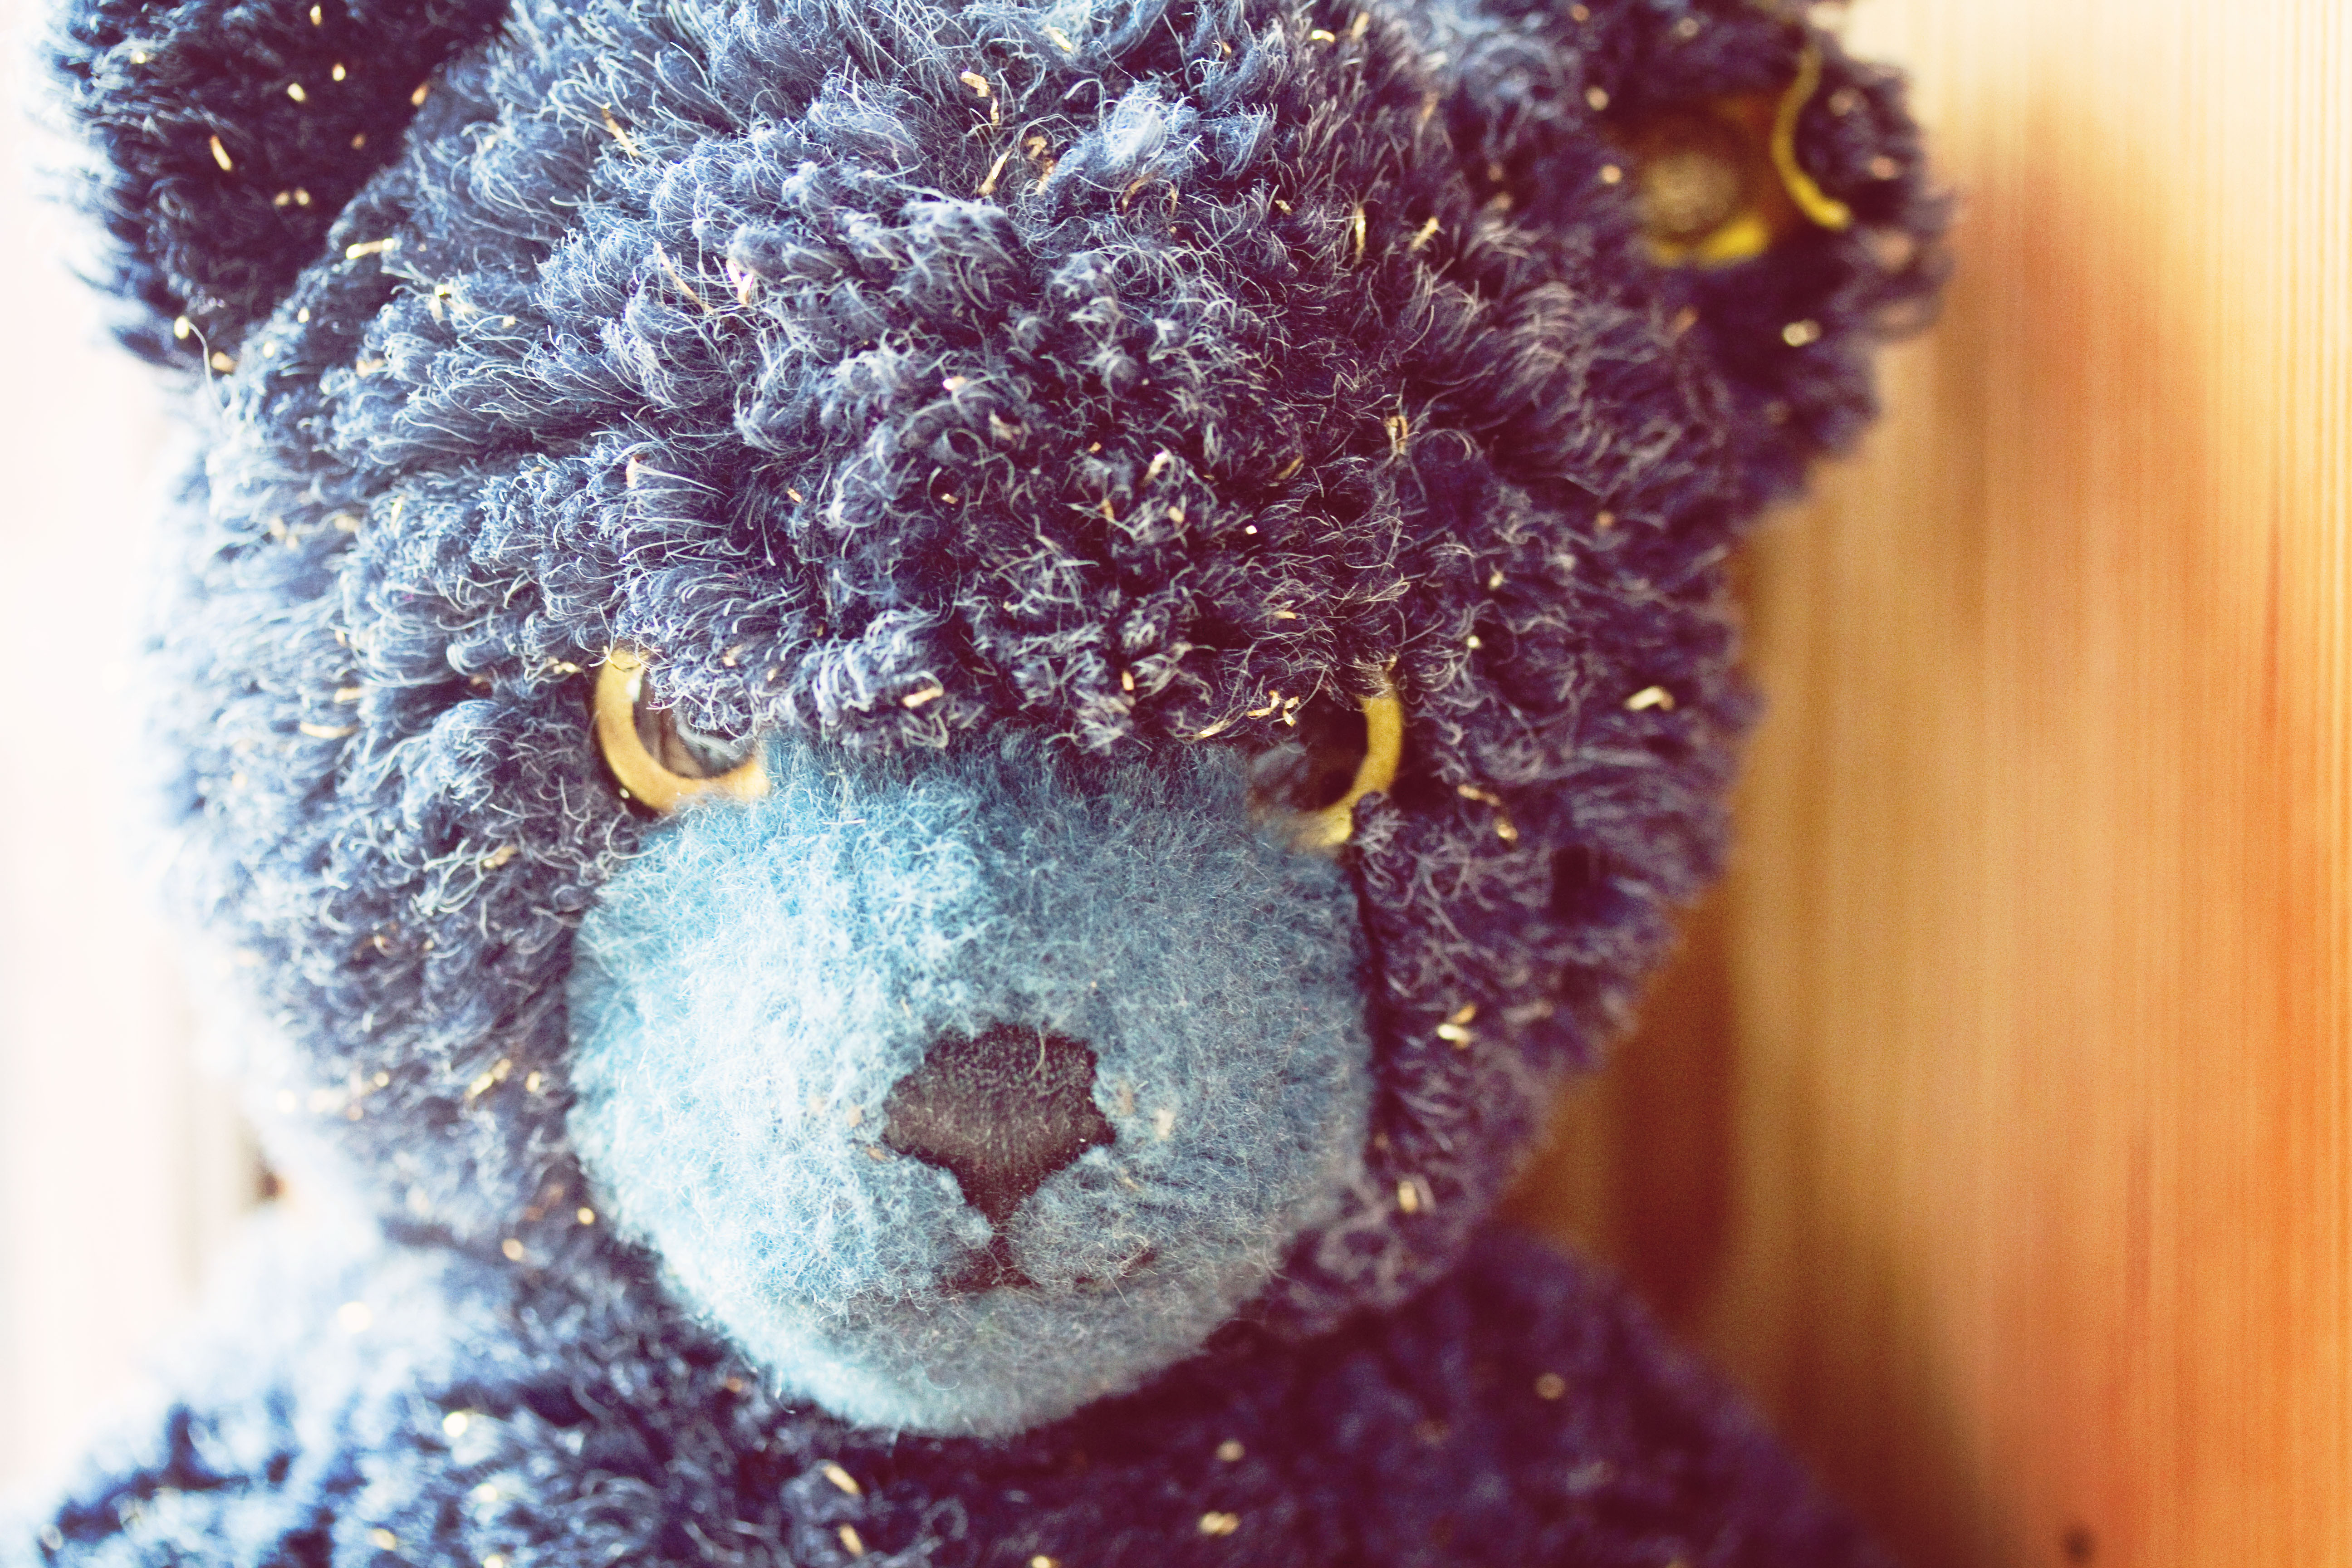 Limited edition Steiff bear with gold glitter detail and angry face